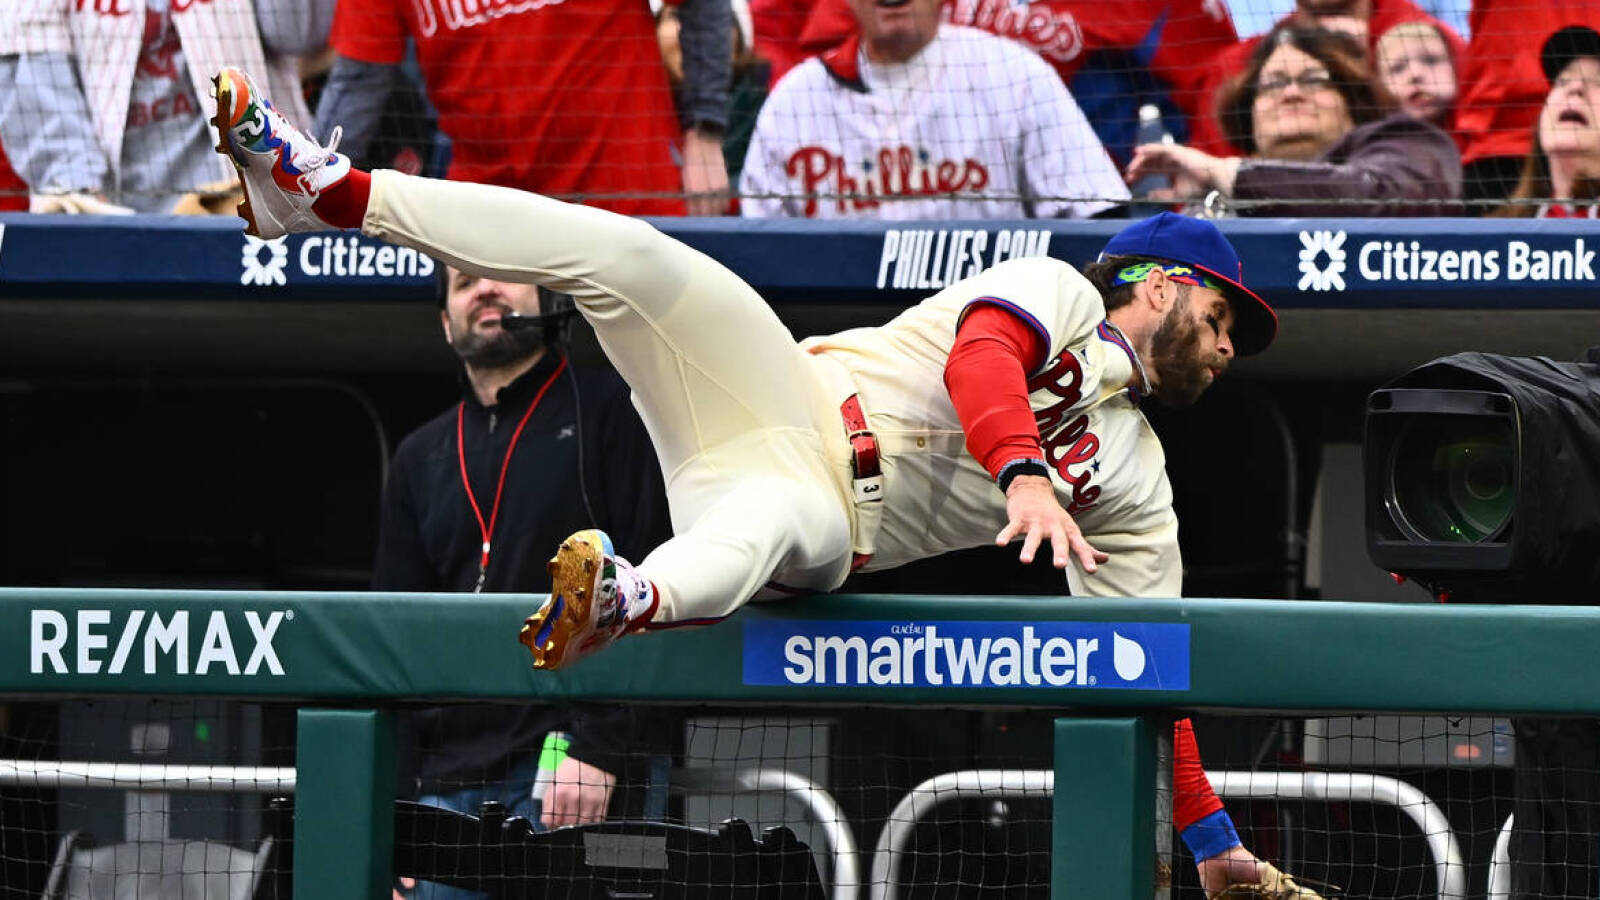 Phillies make alterations to dugout at Citizens Bank Park after Bryce Harper's scary fall